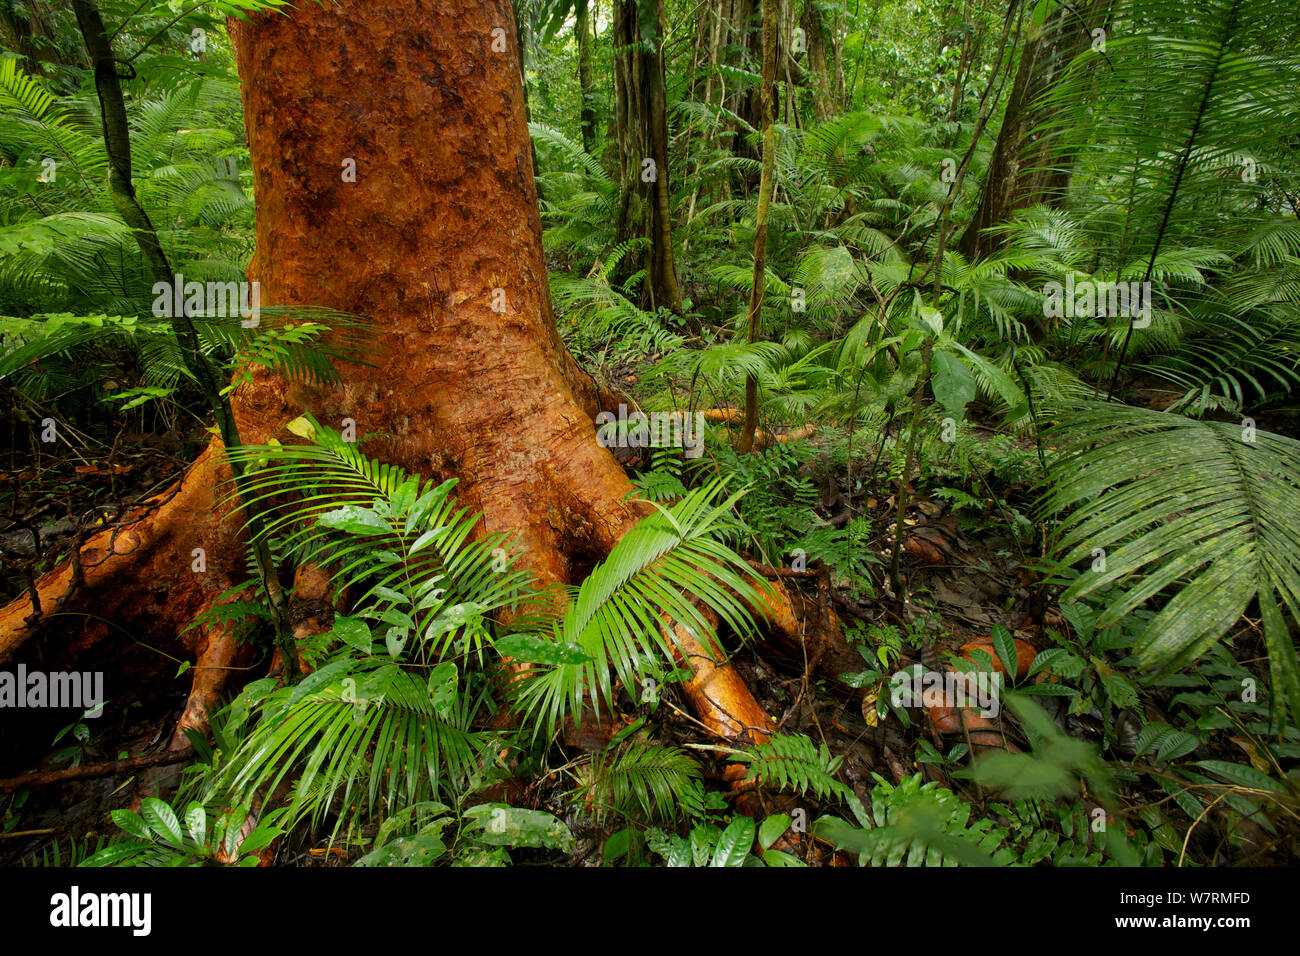 Rainforest interior at Fergusson Island with red barked tree and palms, with large strangler fig in background. Papua New Guinea Stock Photo